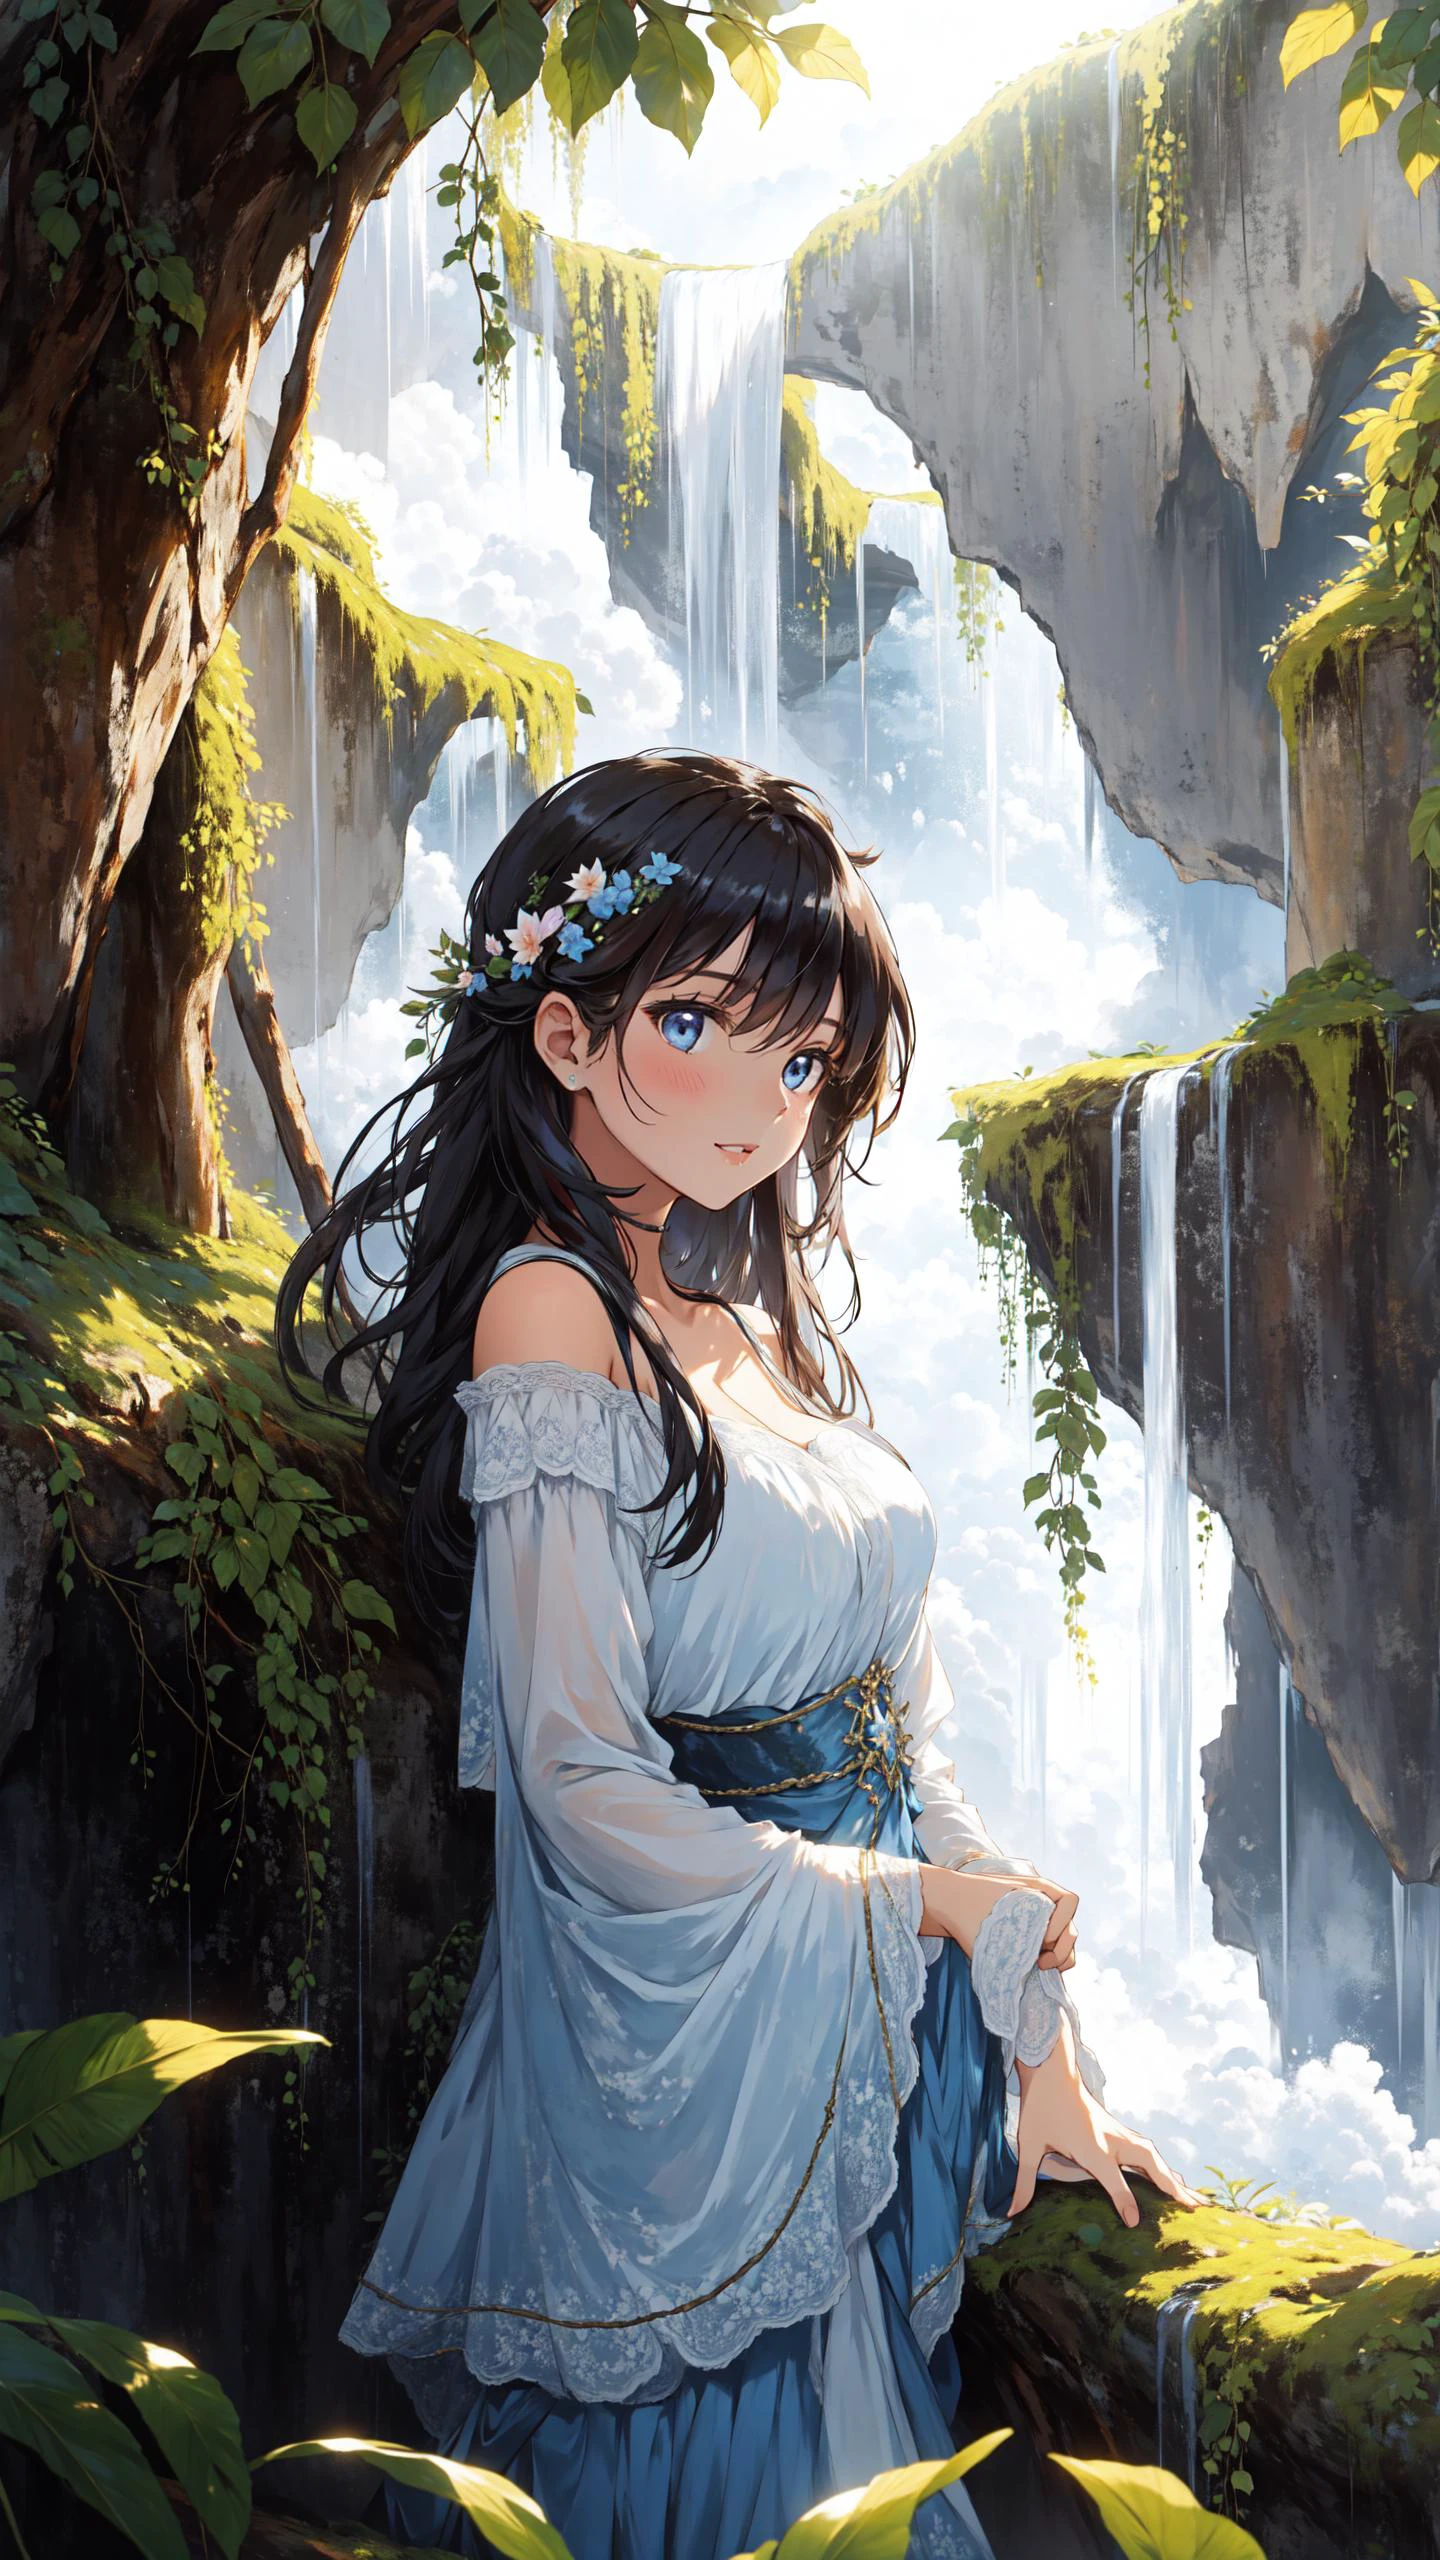 (Layered Depth, Parallax Effect, Soft focus foreground:1.3) (1girl, perfect seductive young woman Discovering a Hidden Sanctuary in the Clouds:1.3), sanctuary floating amidst the clouds, ethereal and hidden, with hanging gardens, flowing waterfalls, and pathways lit by bioluminescent flora.